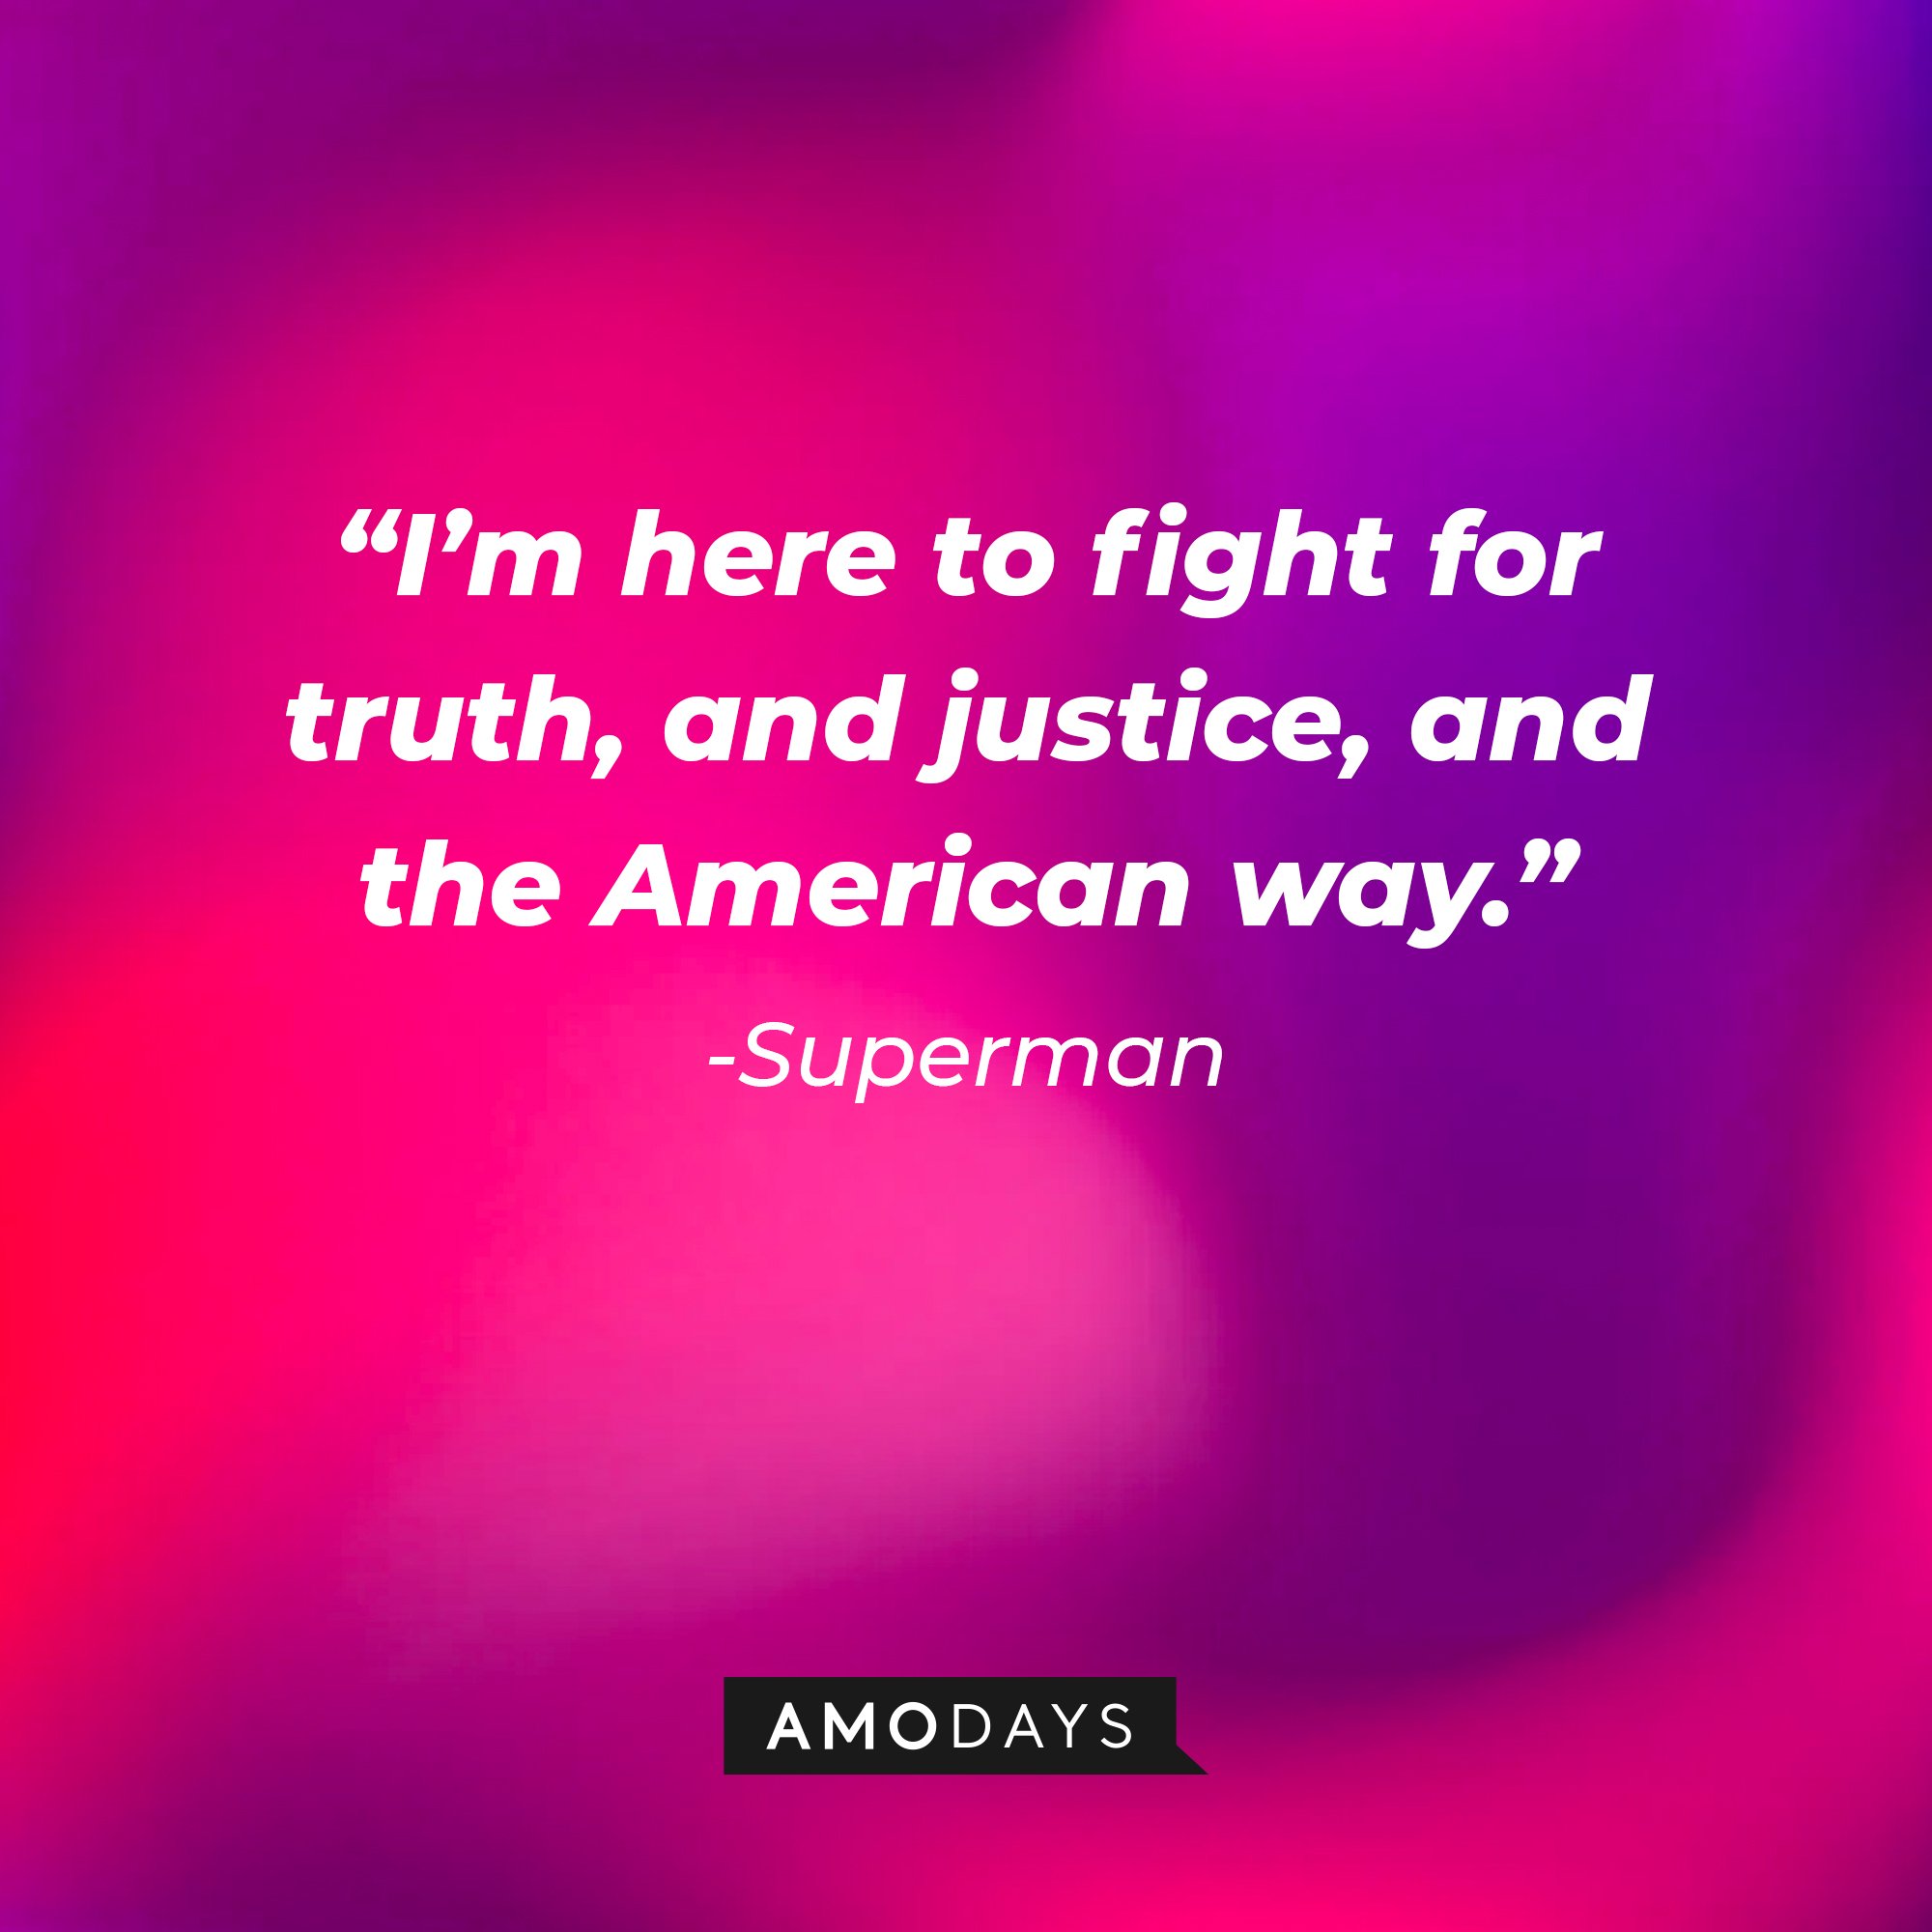 Superman's quote: “I’m here to fight for truth, and justice, and the American way.” | Image: AmoDays